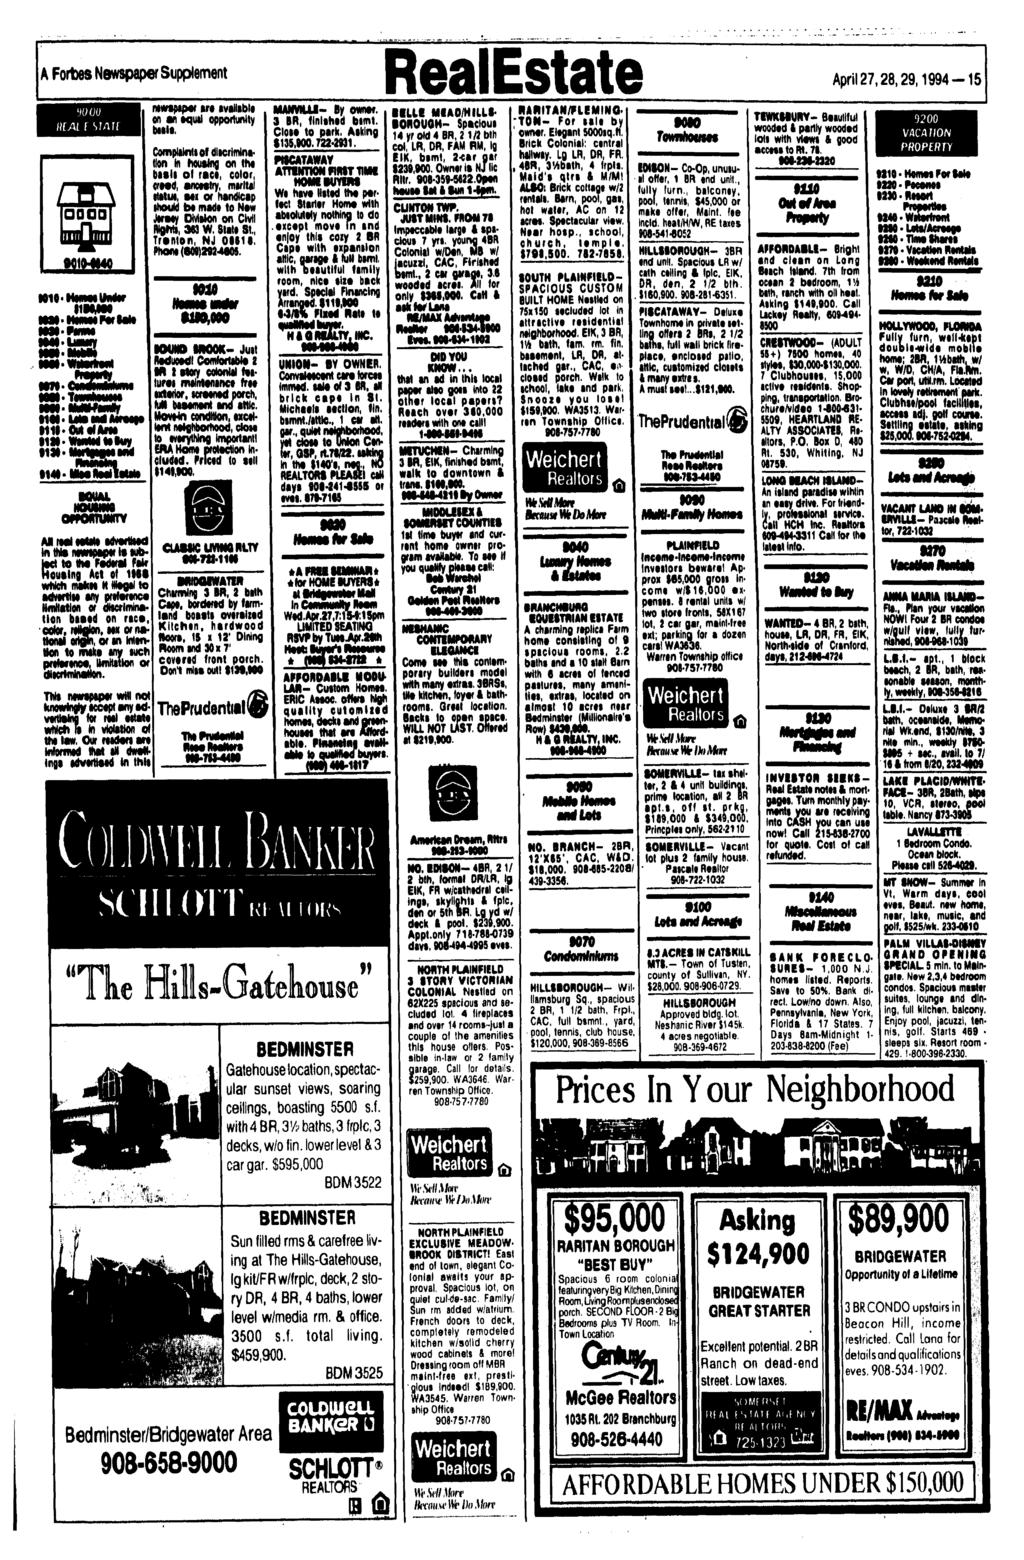 A FortMS Newspaper Supplement RealEstate HN i W t^swsnsj lwt^p»awjw In this newspaper It tubioct to tho Fewera* Paw Housing Act ot 1«S wmoh rflakot H wagw to advertite any onfonnco HnHaMor) or